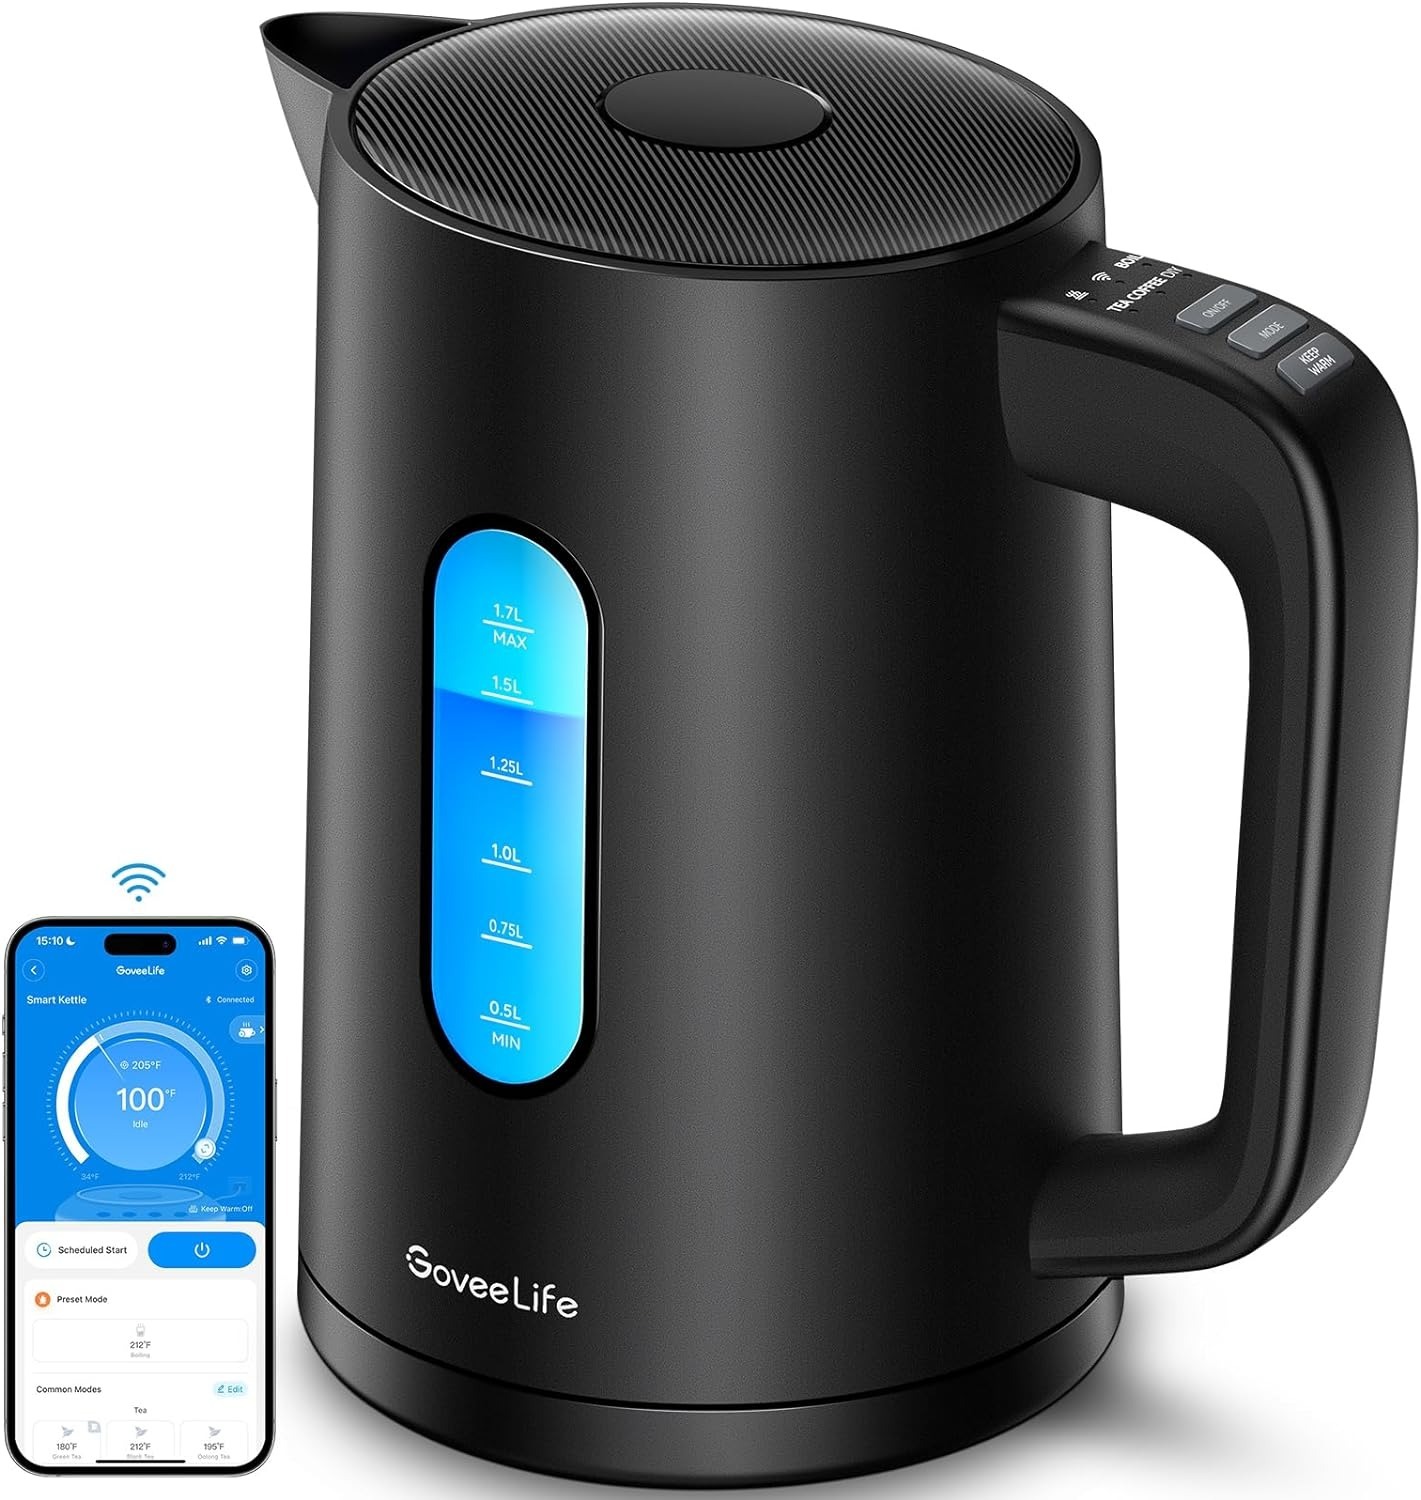 GoveeLife 1.7L 1500W Smart Electric Kettle w/ Temperature Control $30 + Free Shipping w/ Prime or orders $35+